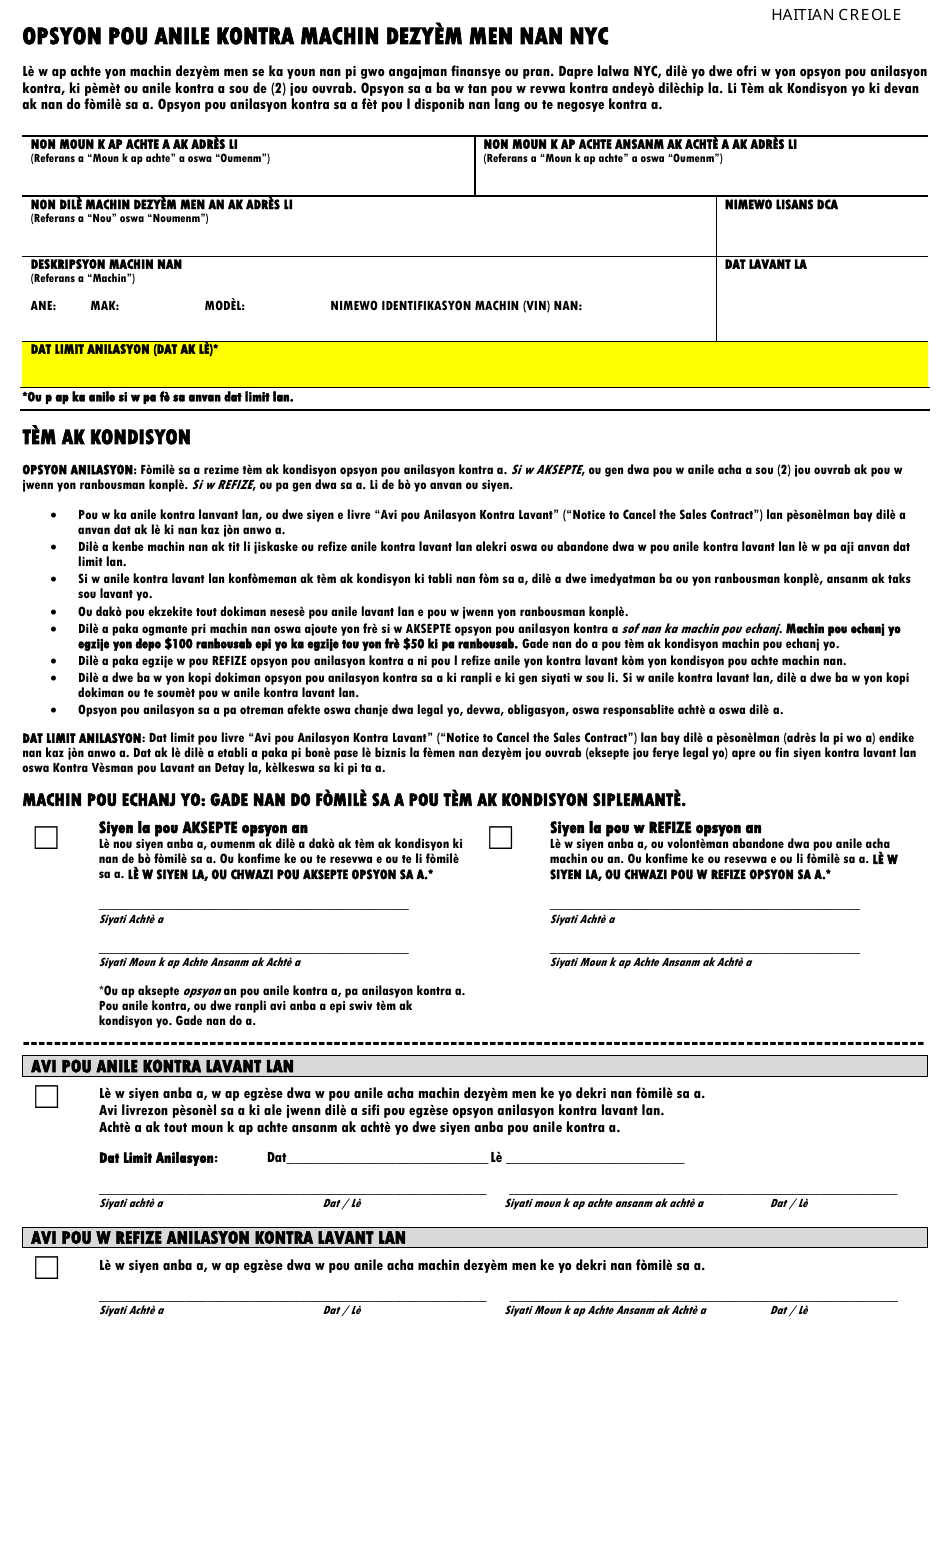 Nyc Used Car Contract Cancellation Option - New York City (Haitian Creole), Page 1